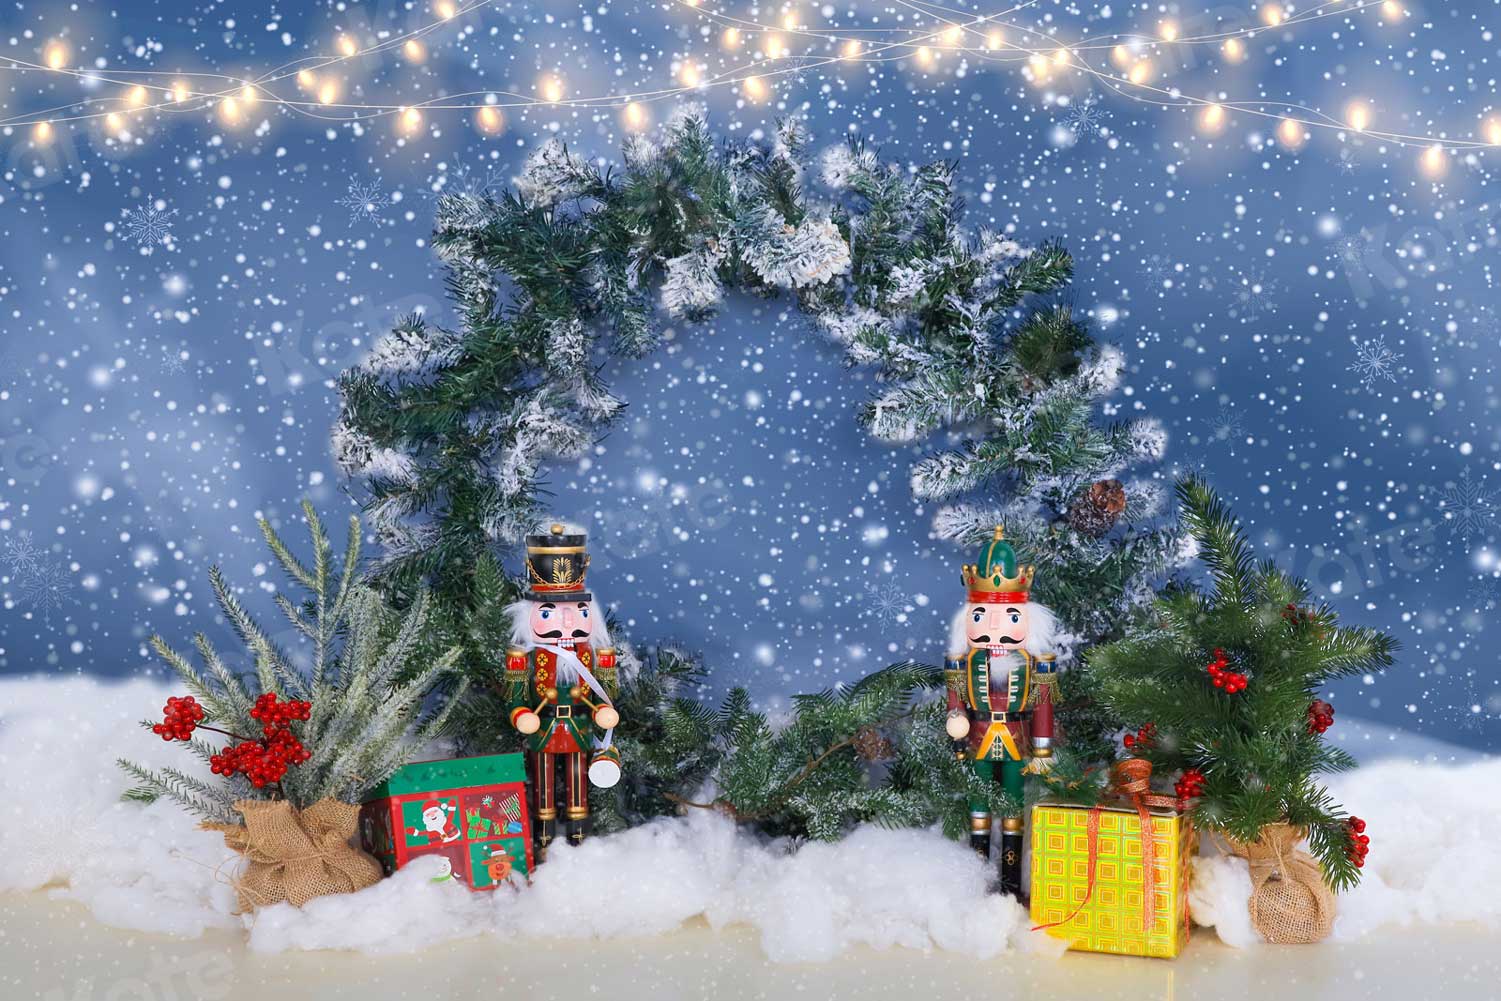 Kate Christmas Winter Backdrop Snow Wreath Toy Soldiers for Photography